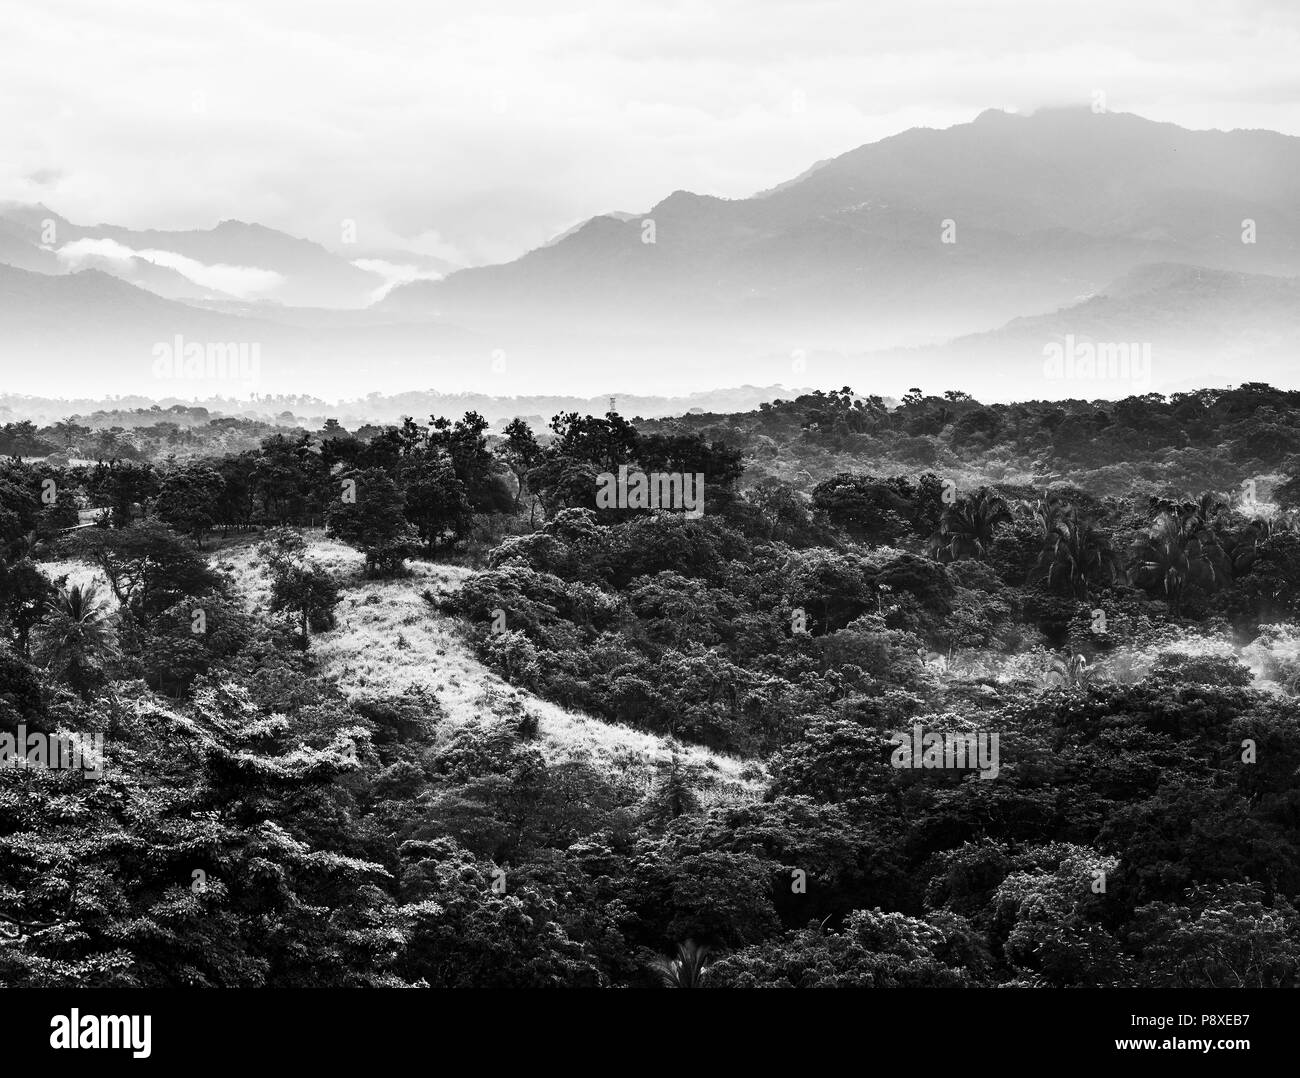 Jungle landscape scenic with mountains on the horizon in Chiapas, Mexico in black and white Stock Photo